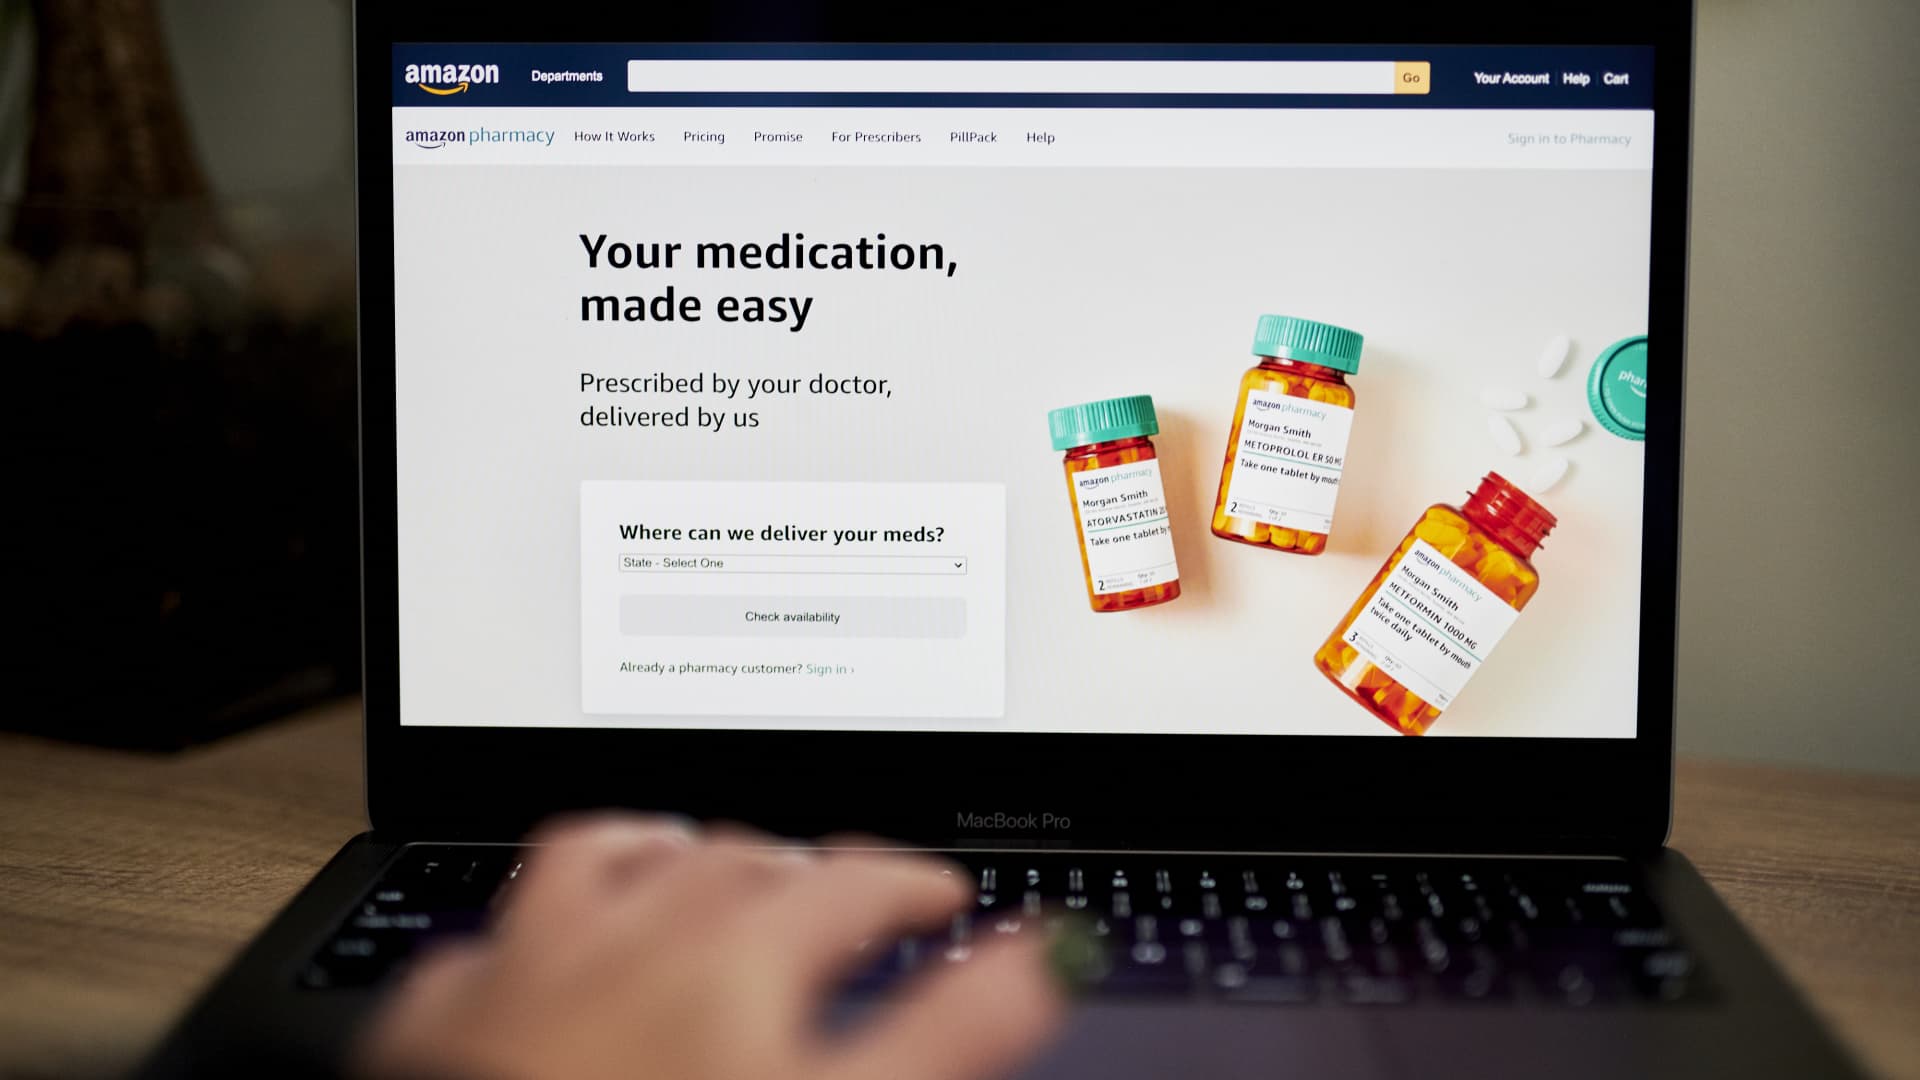 Amazon     on Tuesday announced a new prescription perk for U.S. Prime members, hoping to boost subscriptions and attract users to its pharmacy servic